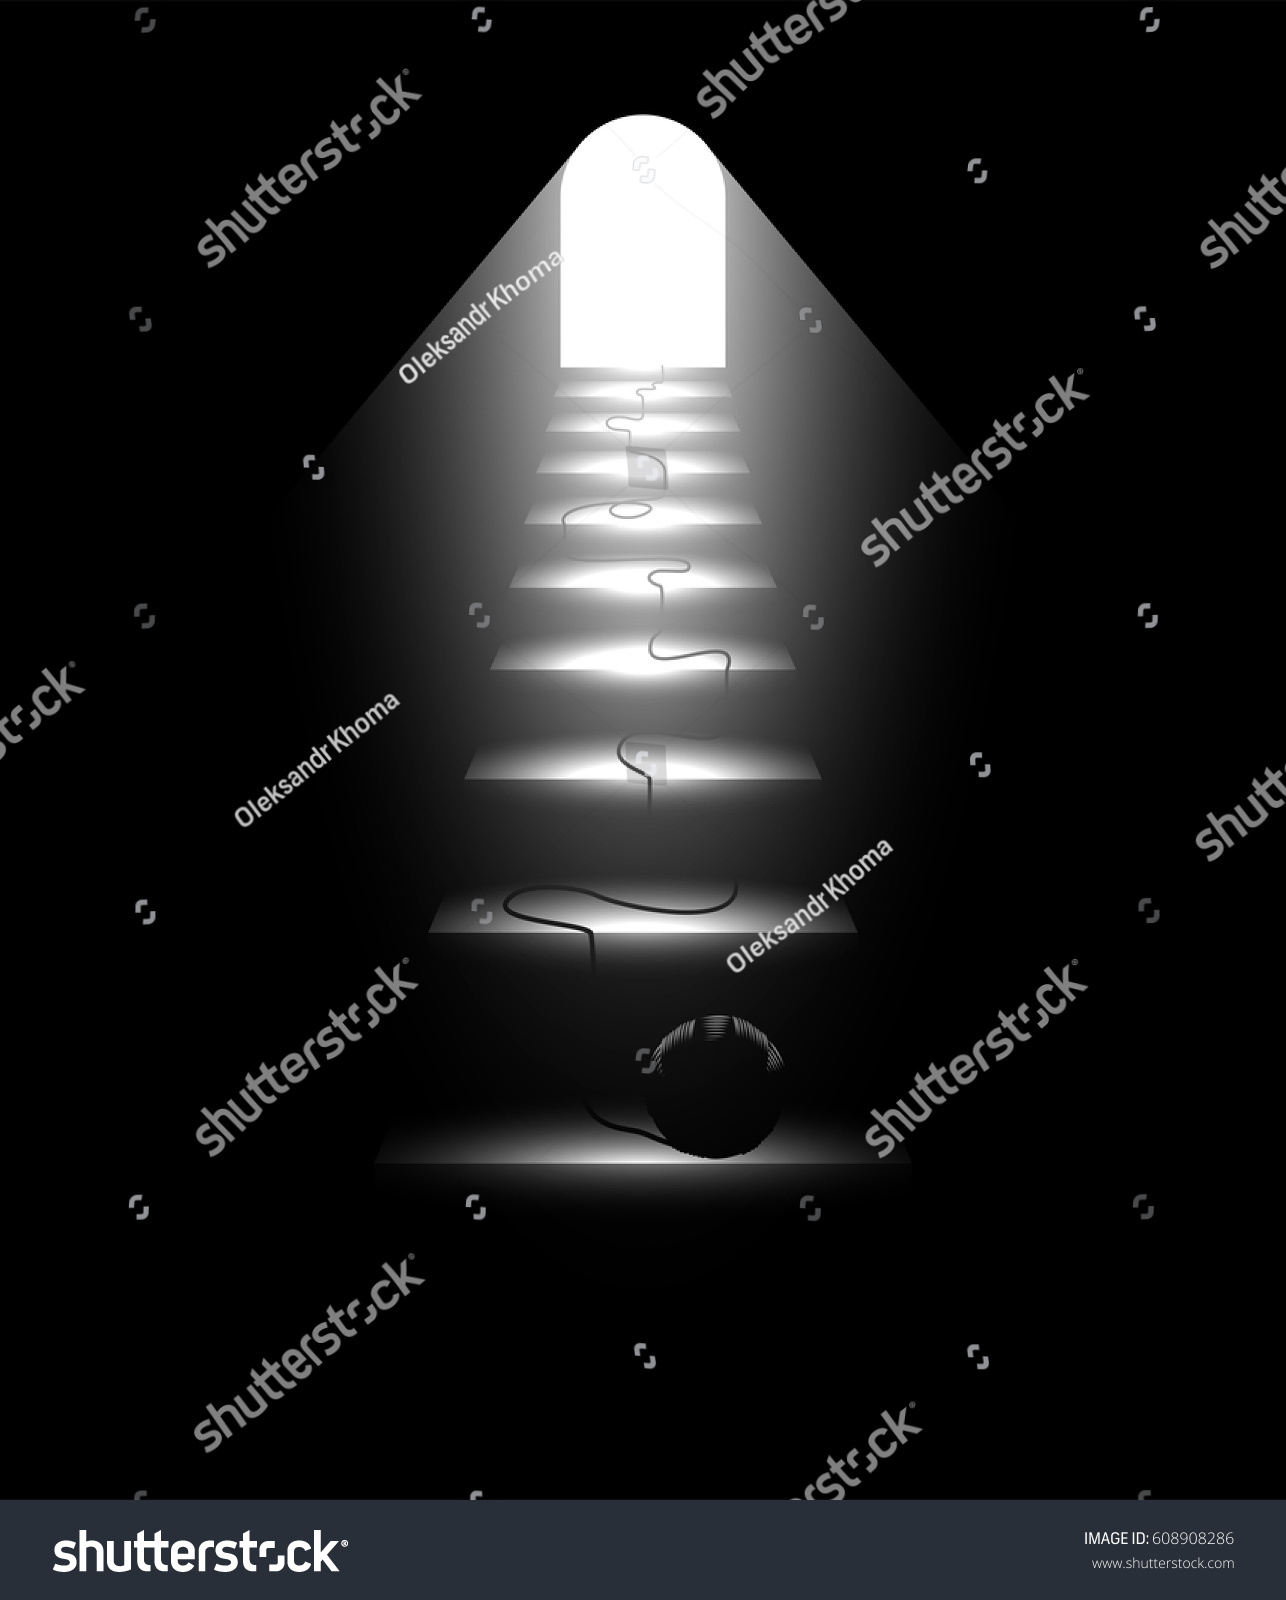 SVG of Social issue solving, way to the light and freedom, light in the end of the tunnel, Ariadne thread, exit from a routine and problems minimalist concept. Abstract simple surrealistic background. svg